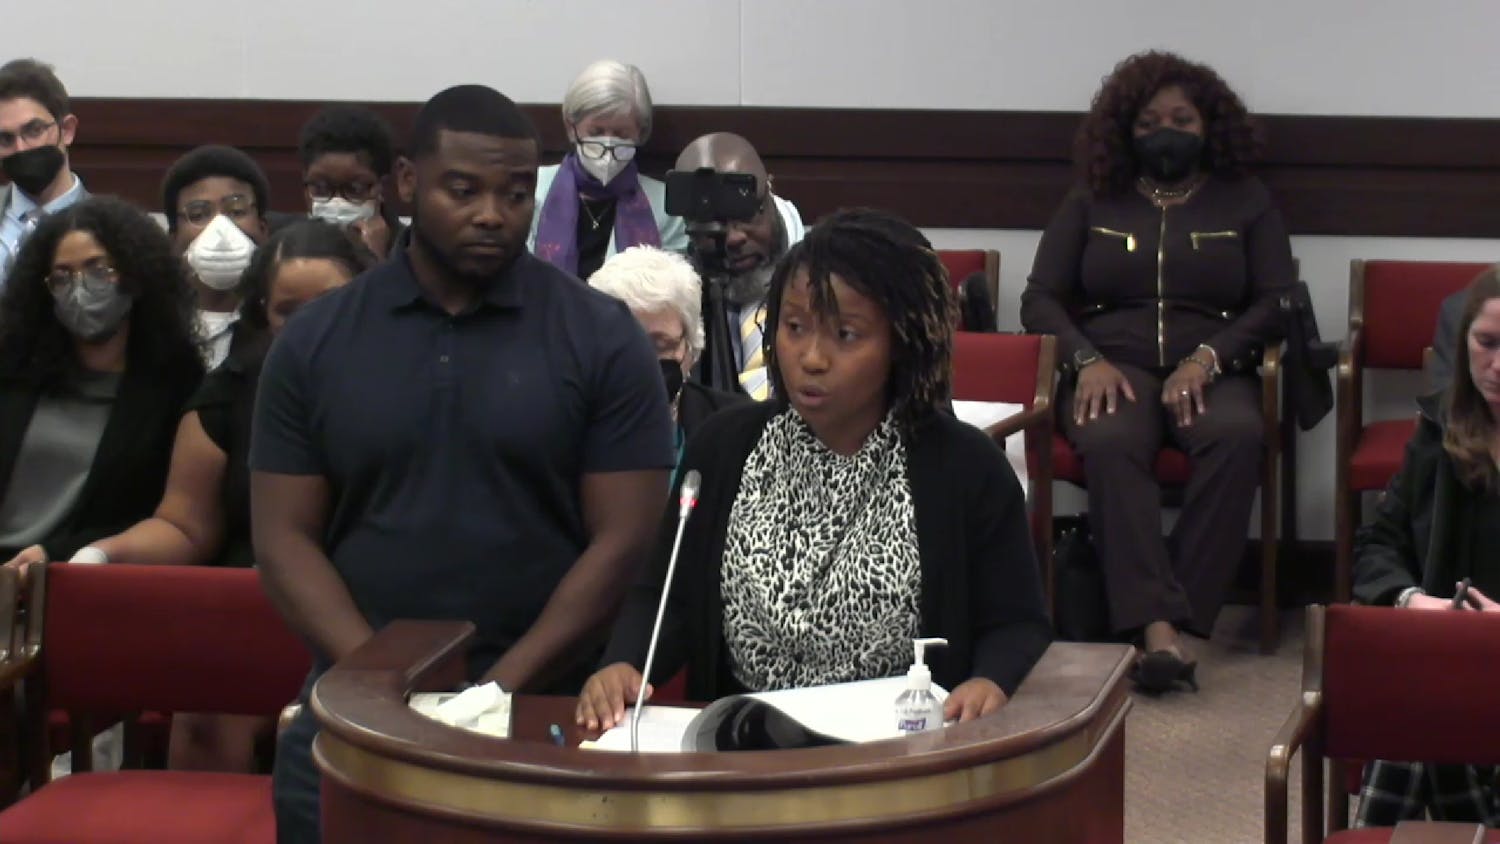 Parents of the community in the Statehouse committee meeting Feb 16, 2022. Octavia and Thomas Edwards parents of students in SC schools, discuss their children's experience in schools.